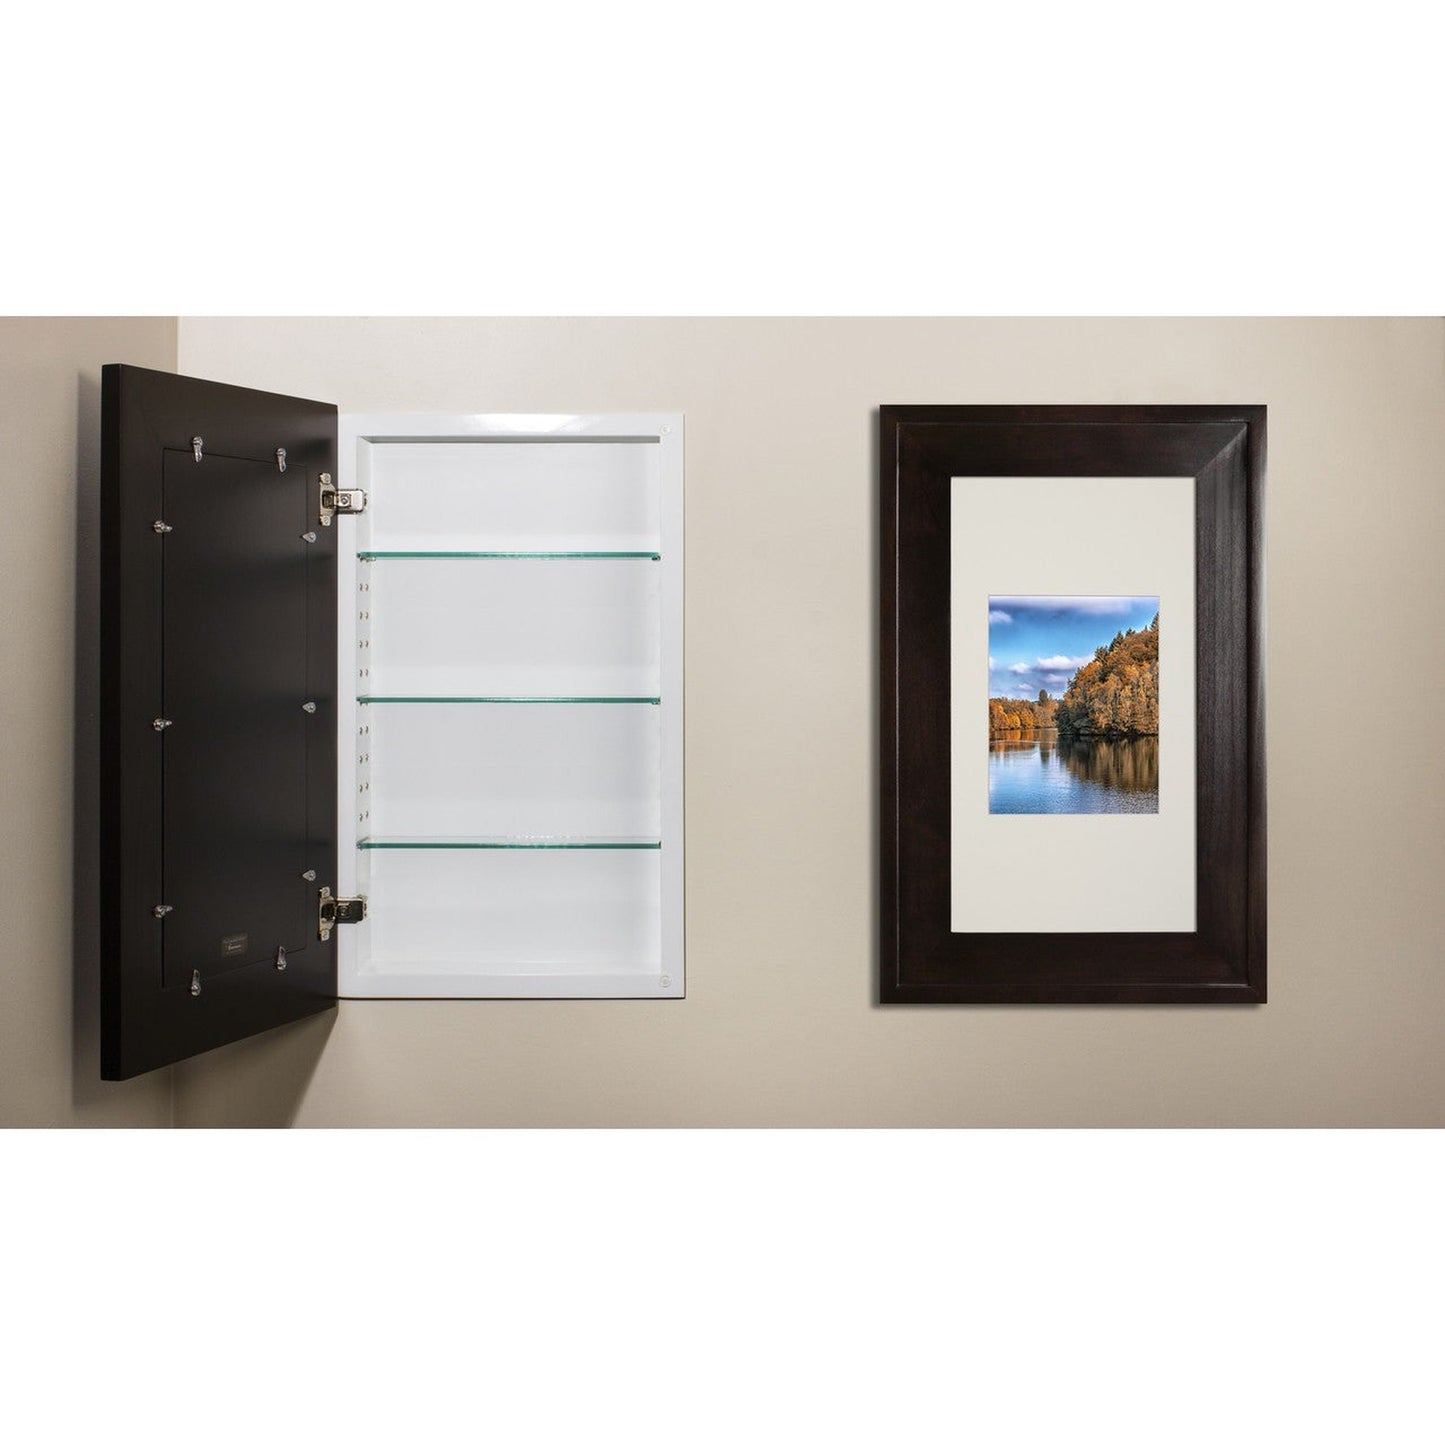 Fox Hollow Furnishings 14" x 24" Coffee Bean Extra Large Natural Interior Standard Depth Recessed Picture Frame Medicine Cabinet With Mirror